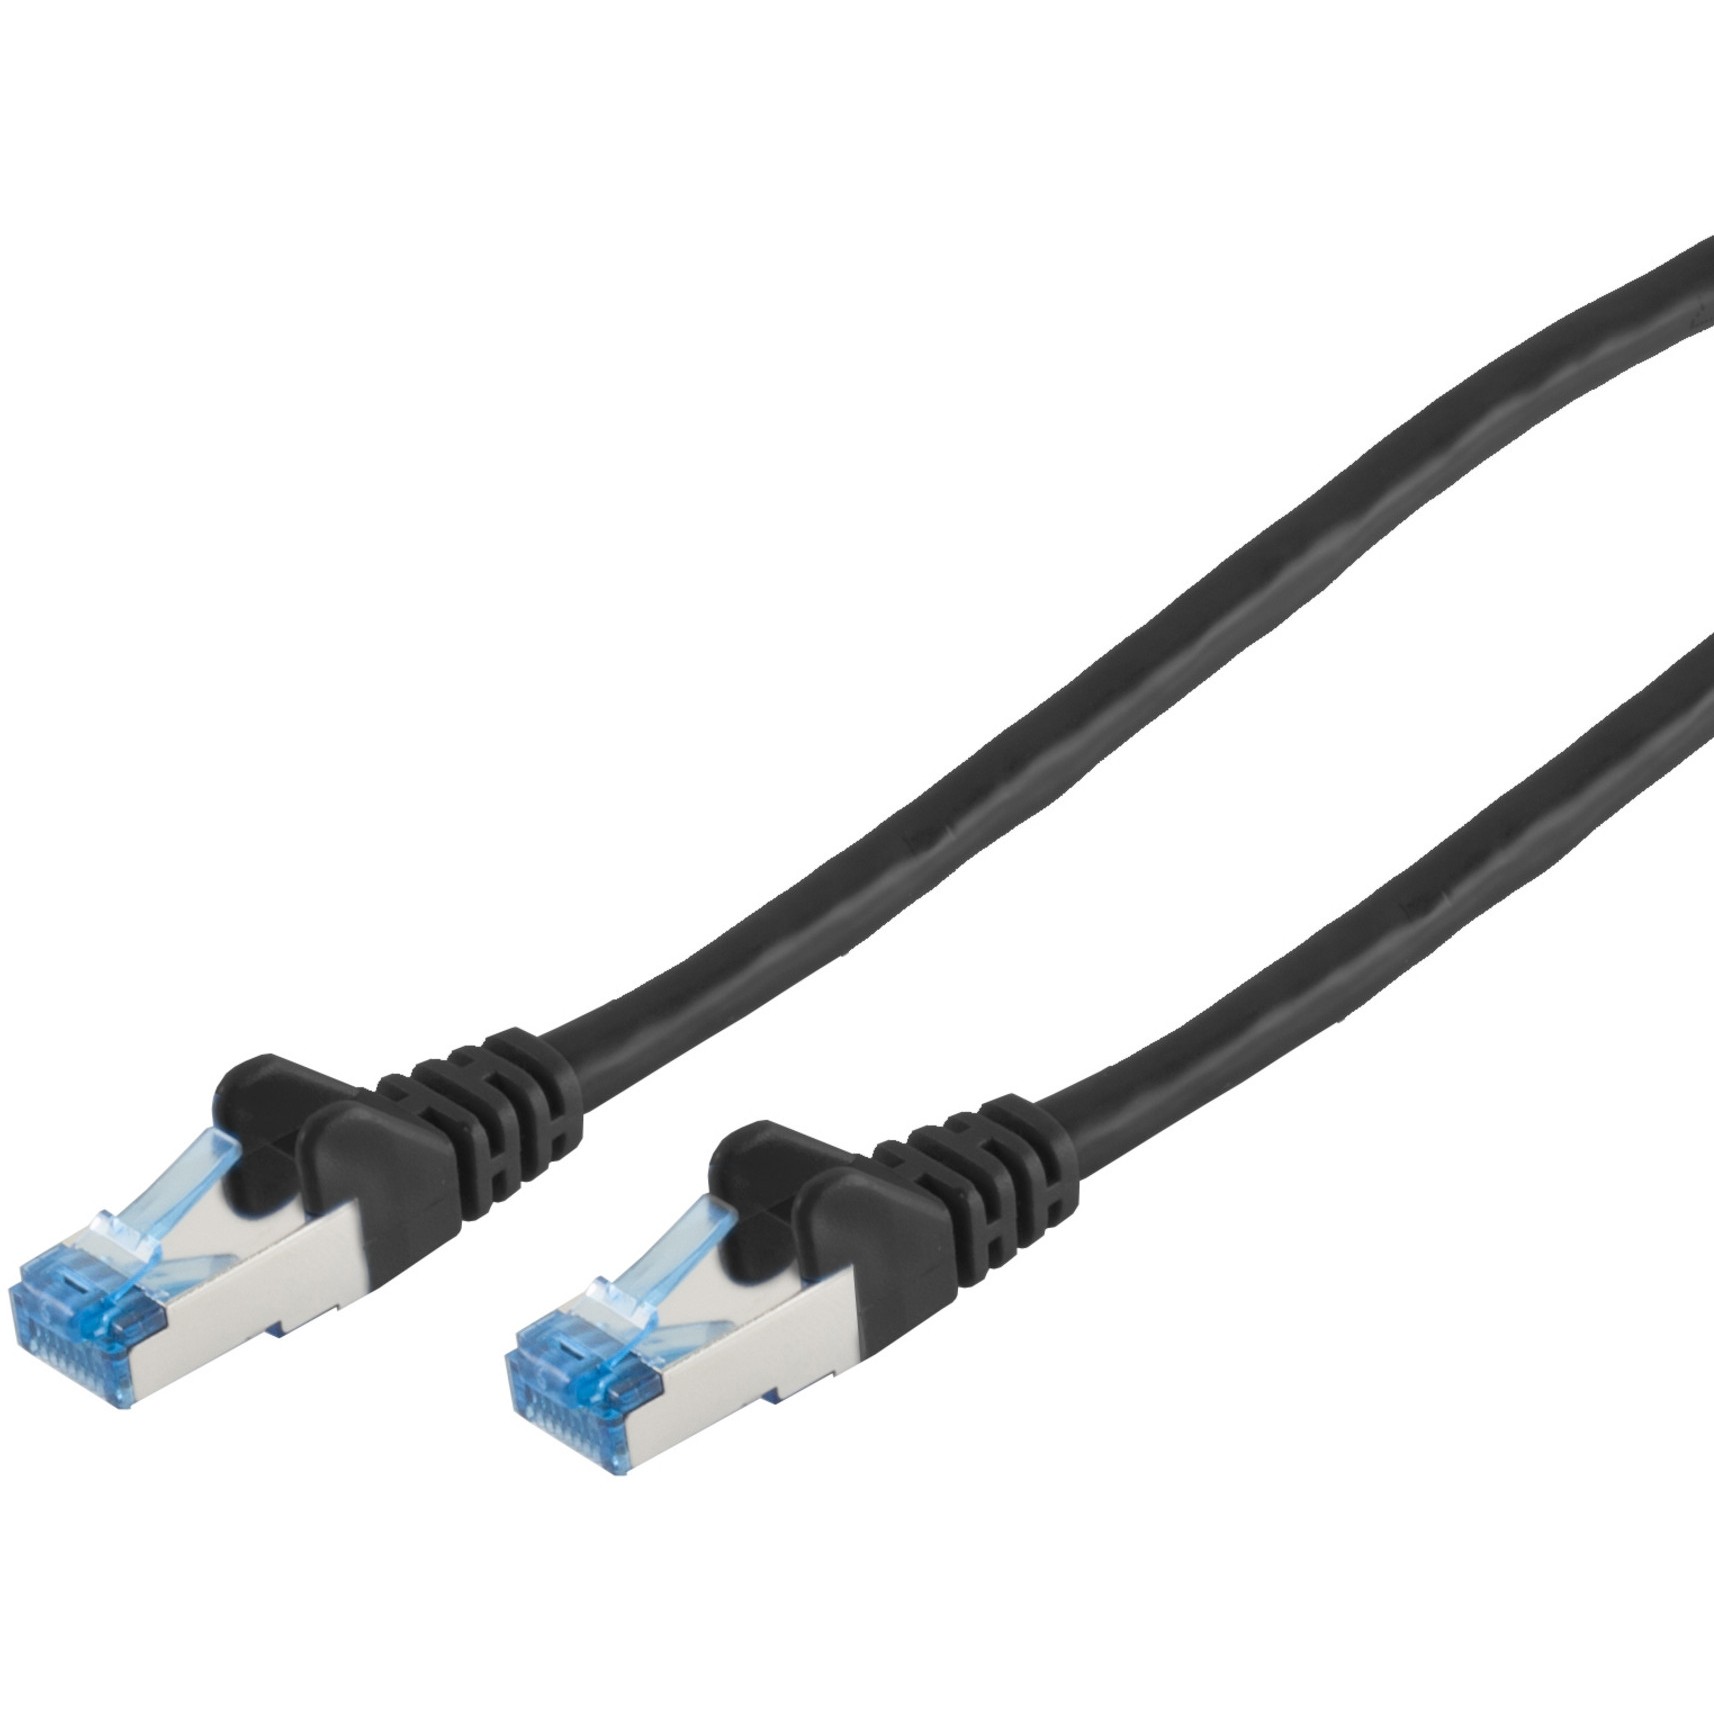 S-Conn 75711-0.25S networking cable